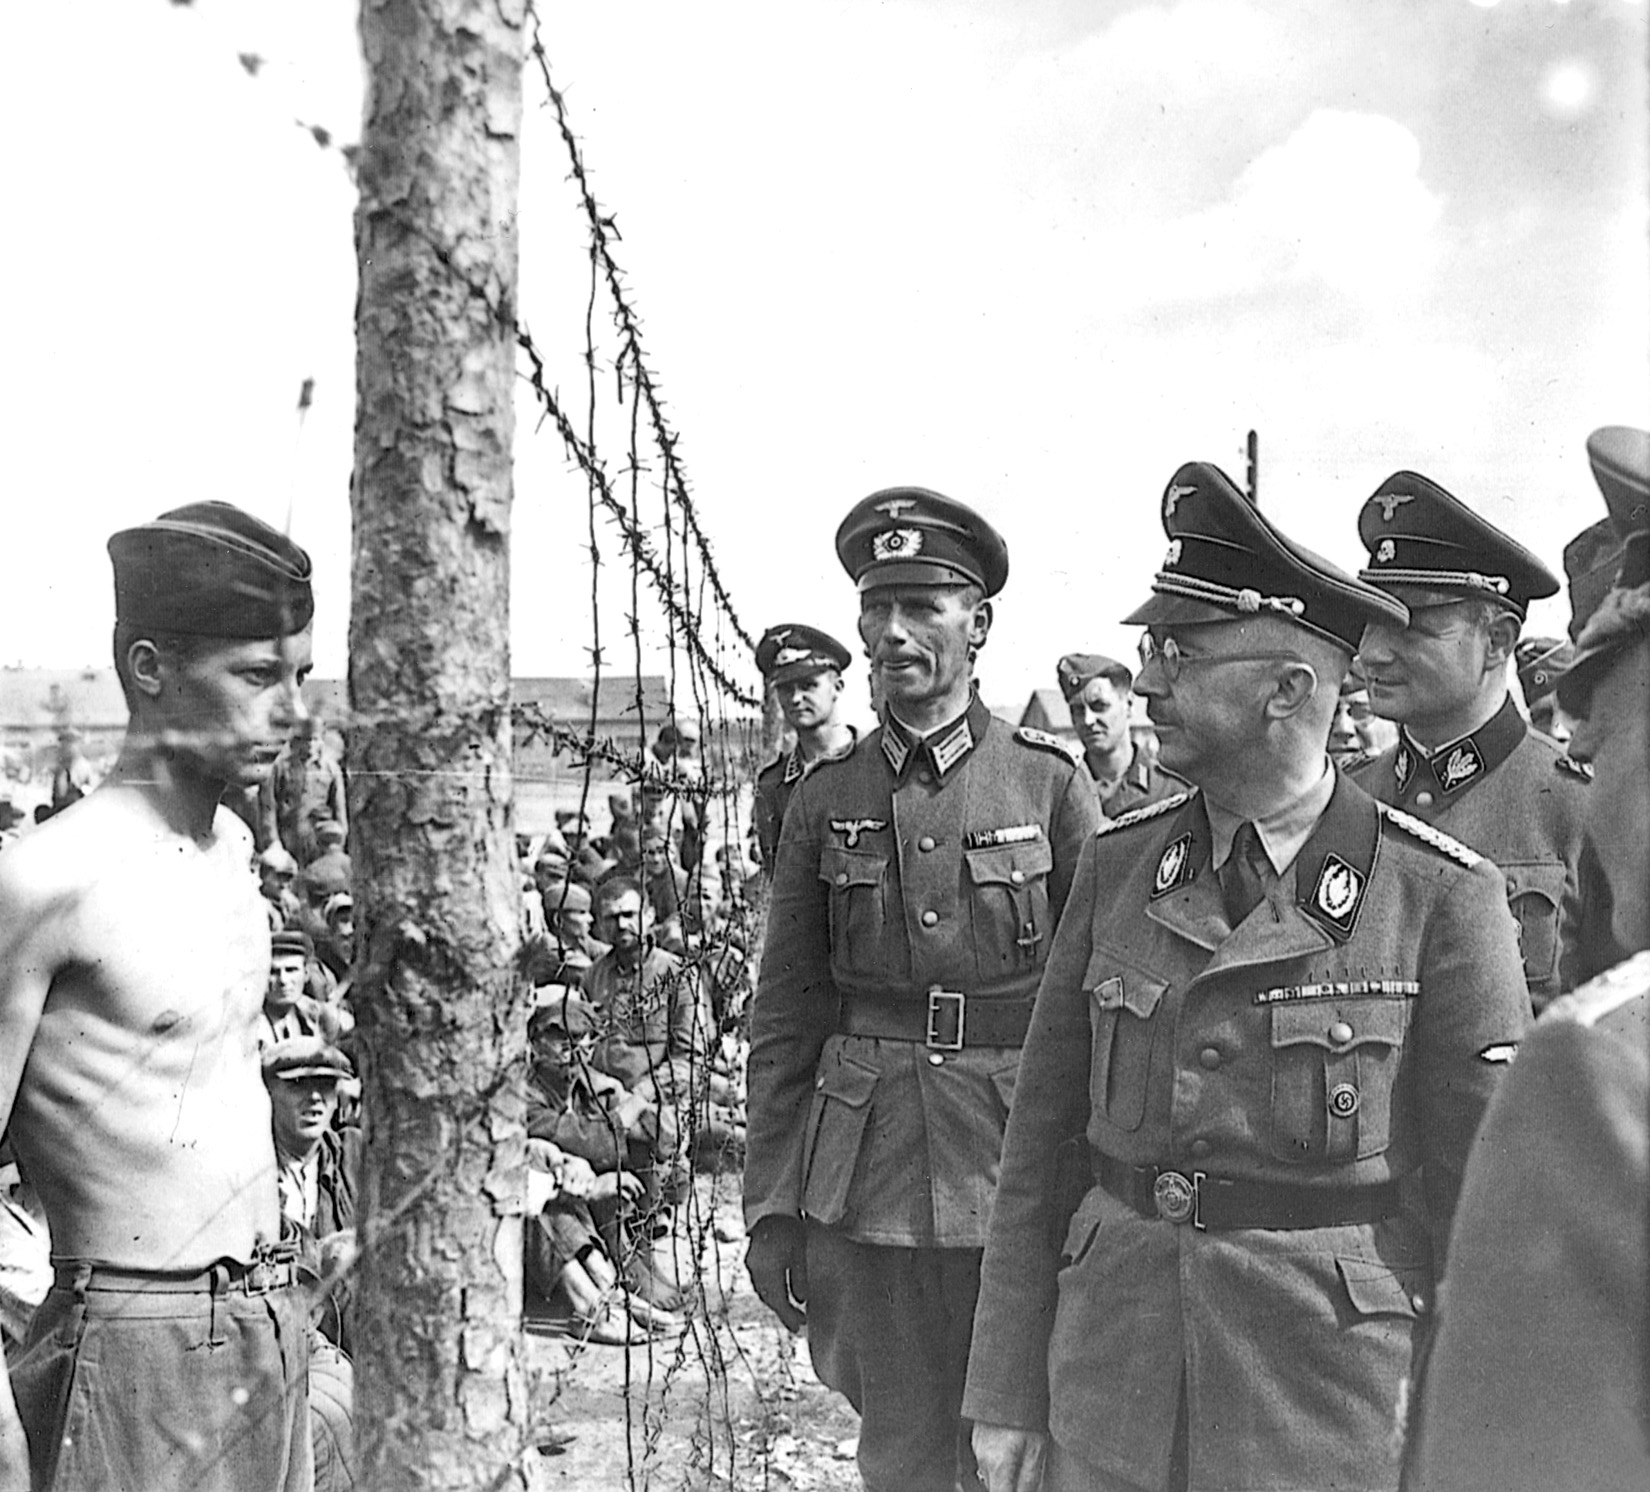 SS chief Heinrich Himmler and his entourage inspect a prison camp overflowing with Soviet POWs. Vlasov recruited heavily among dissaffected prisoners to fill the ranks of his army.